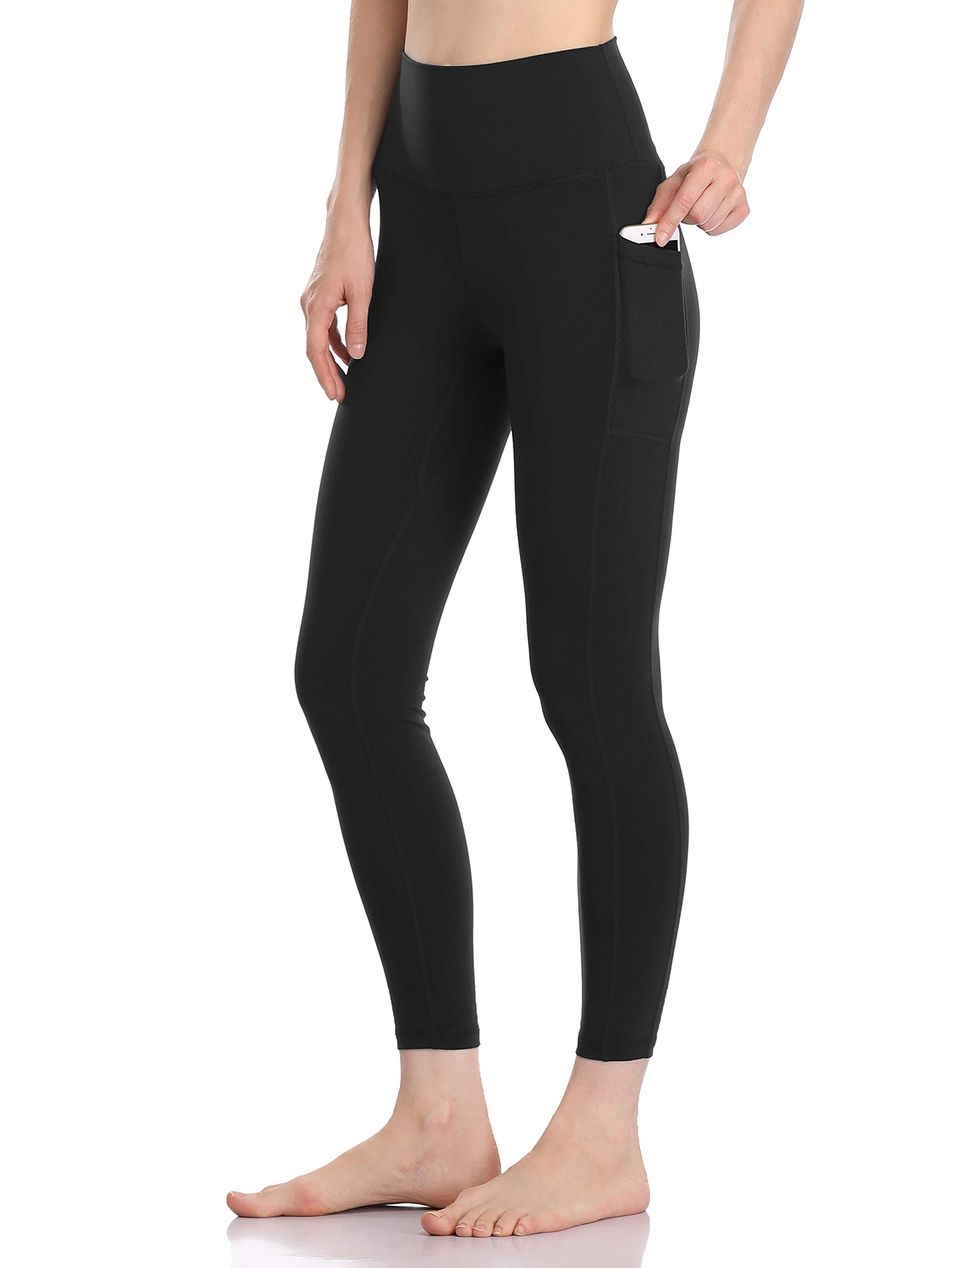 Exceptionally Stylish Leggings With Pockets at Low Prices 